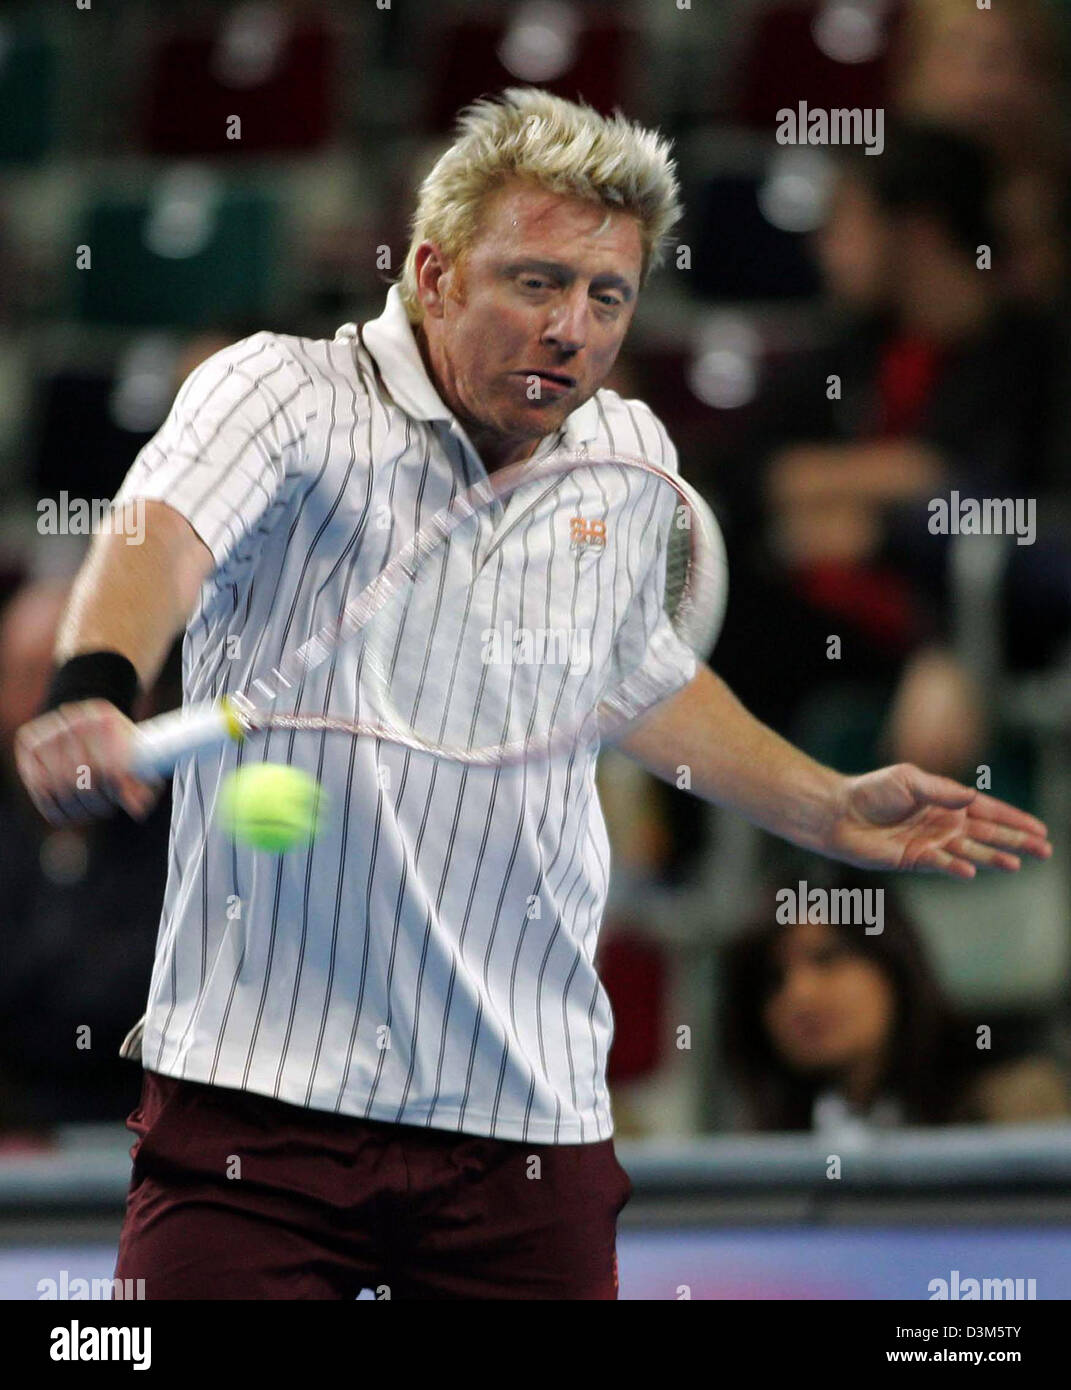 dpa) - Former tennis ace Boris Becker plays a backhand as he plays against  his former French centre court rival Henri Leconte in a show tennis match  in Bremen, Germany, Sunday, 27